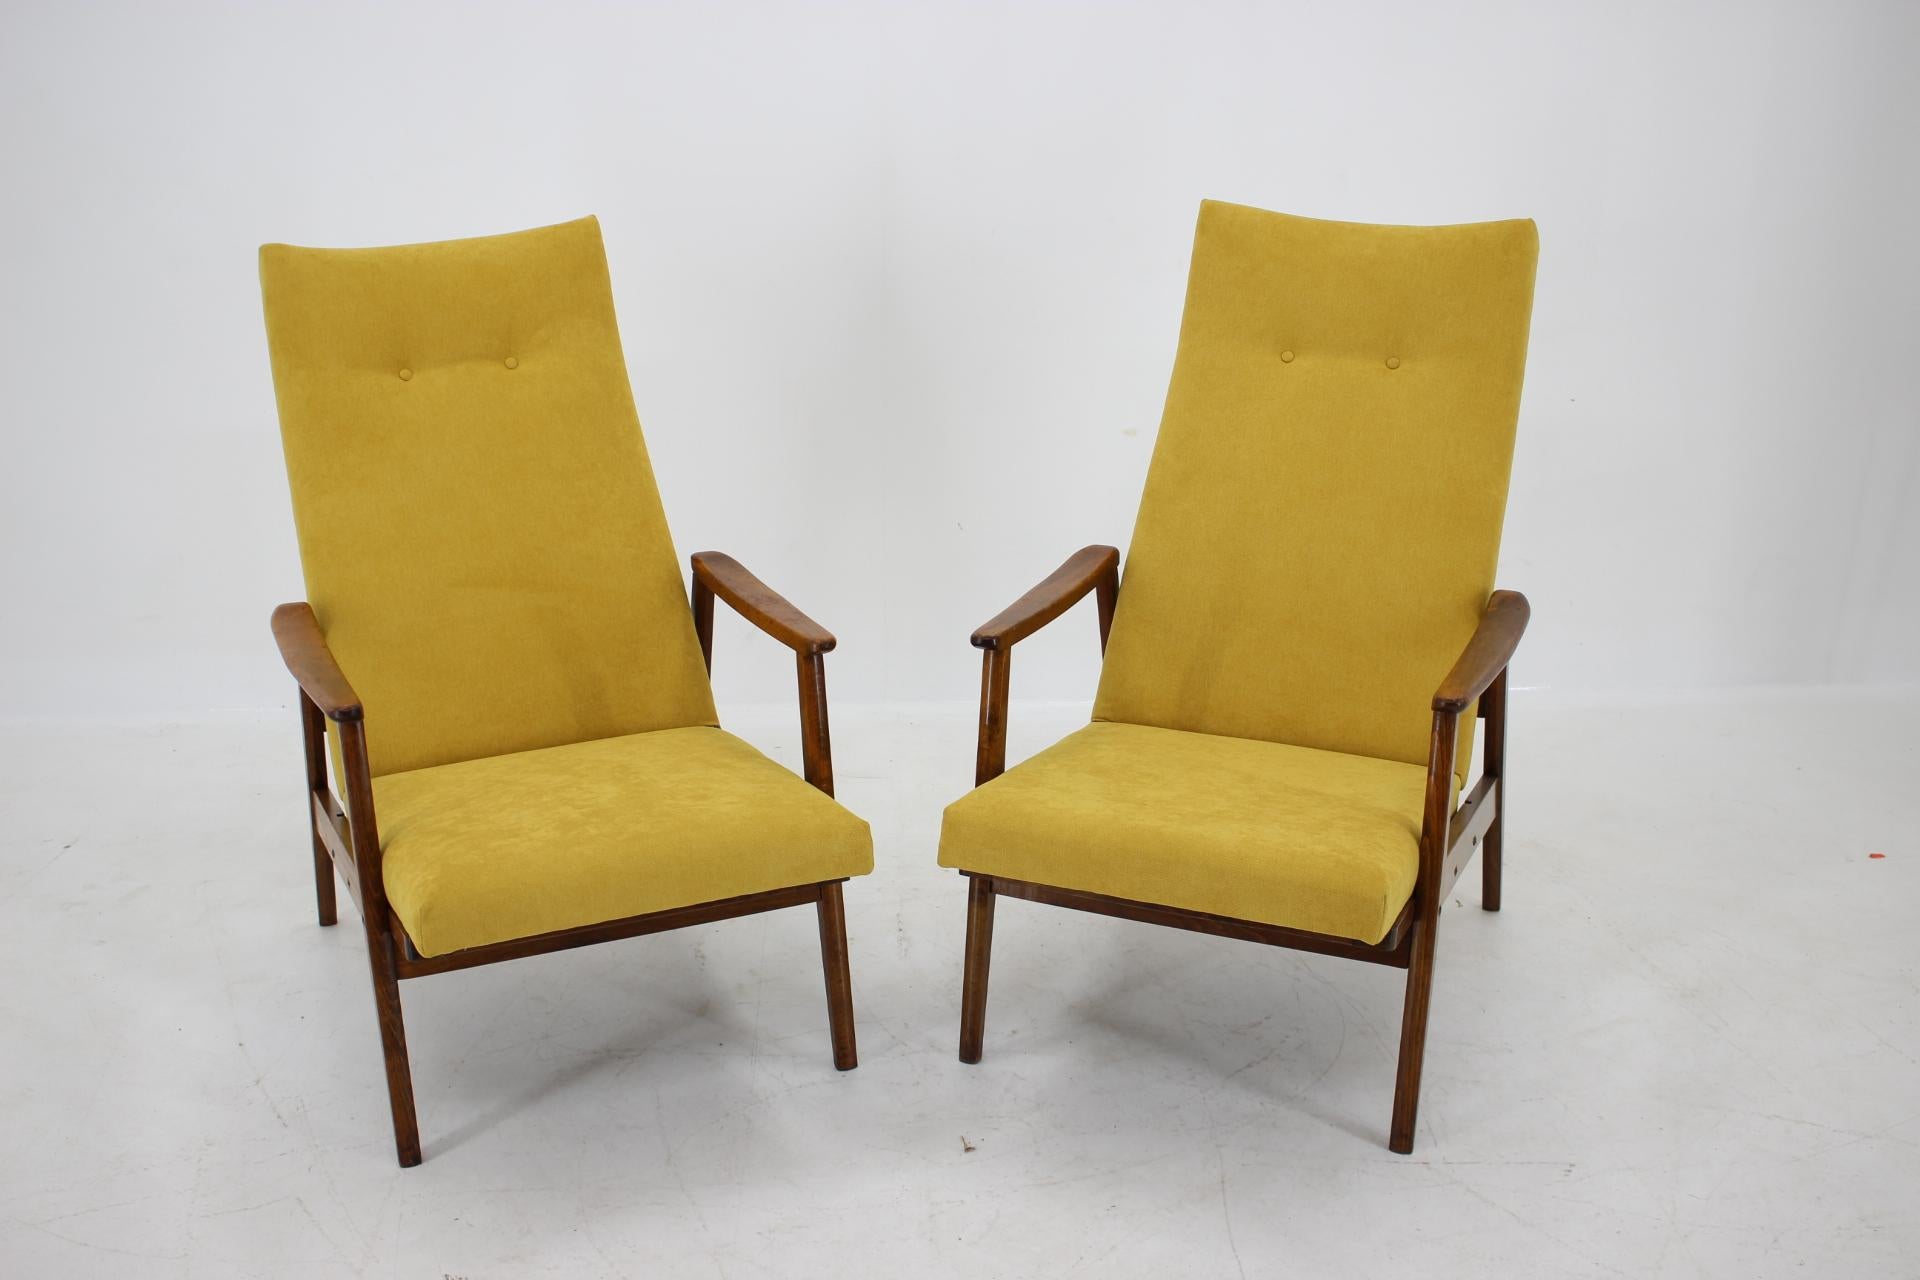 - Made in Czechoslovakia
- Made of beech, fabric
- Wooden parts are restored
- New upholstery
- Armchairs have six positions
- Good, original condition.